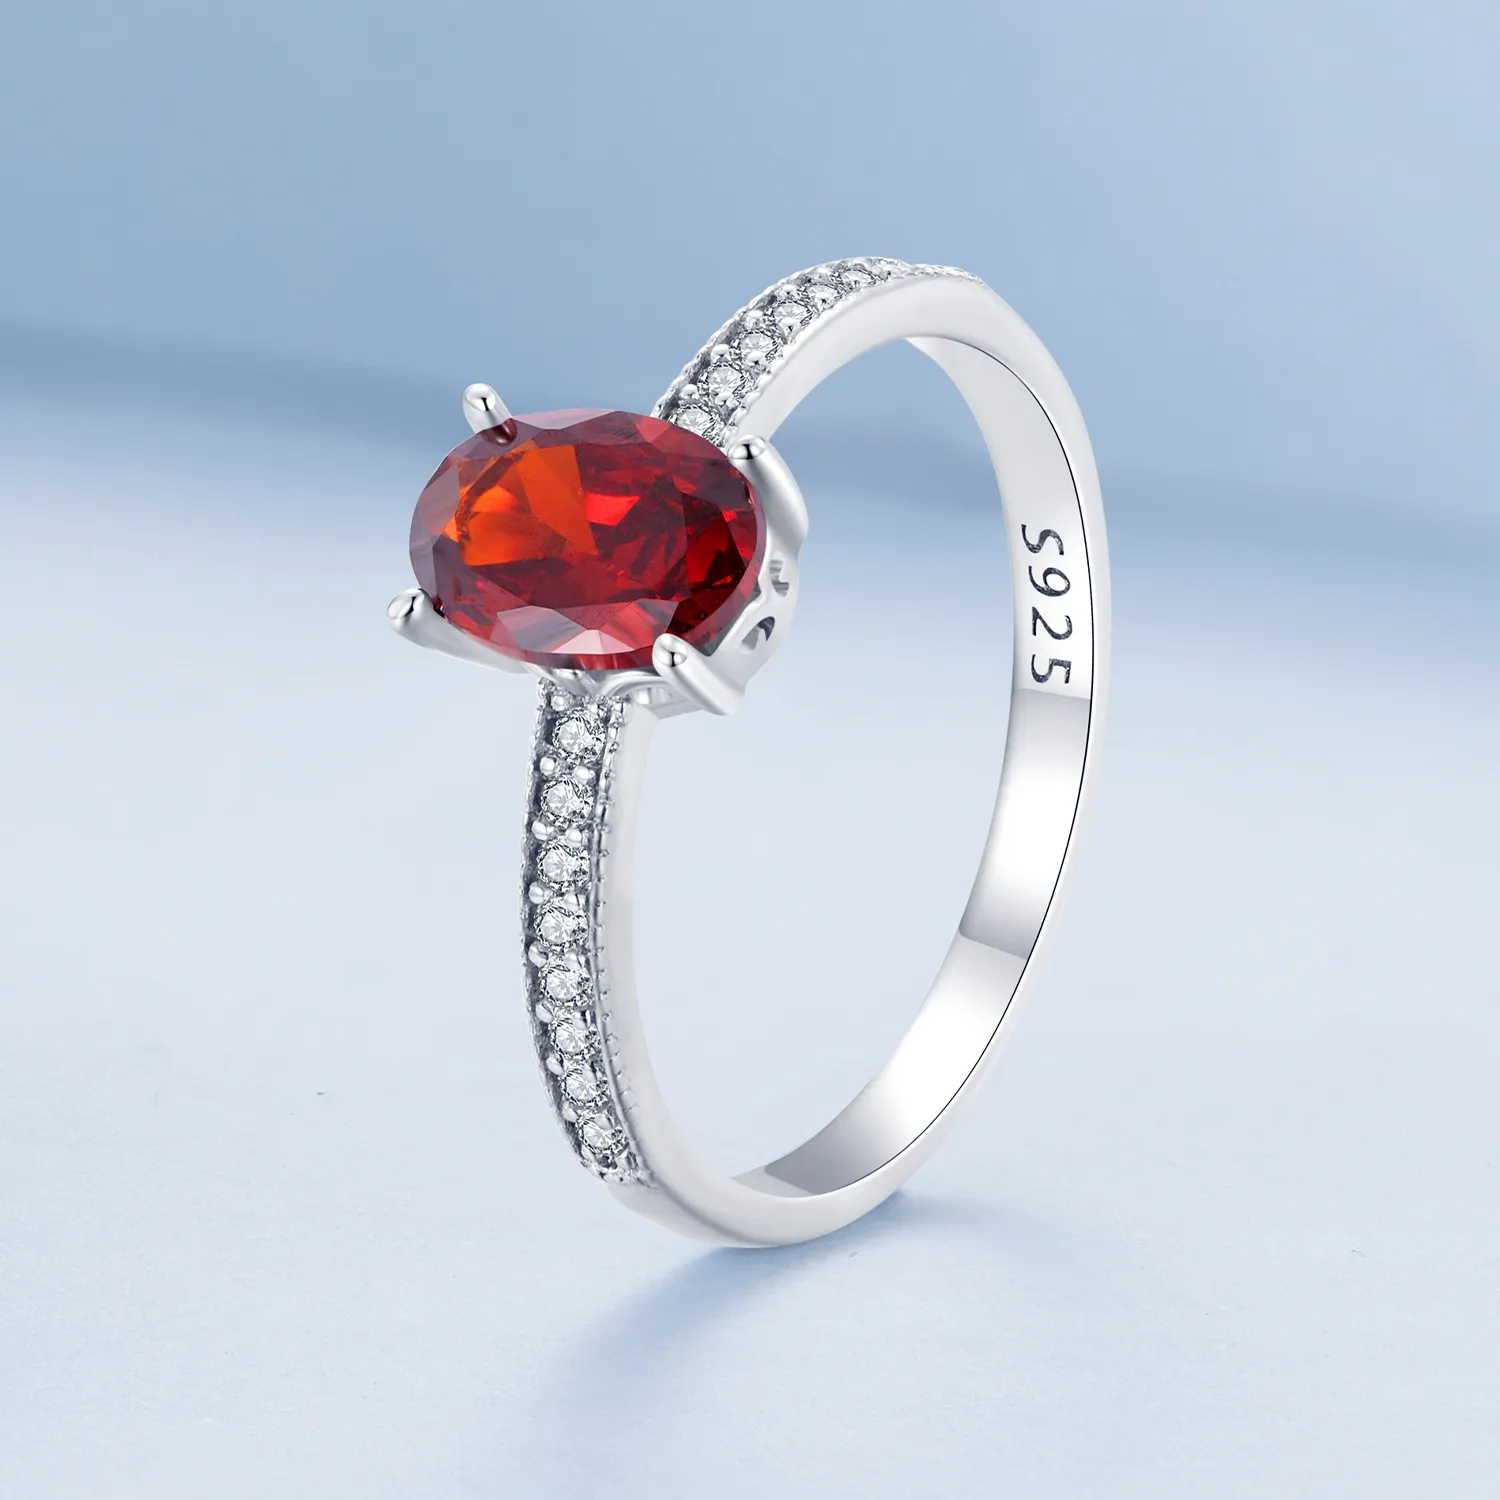 Pandora Style Red Ring - BSR460-RD